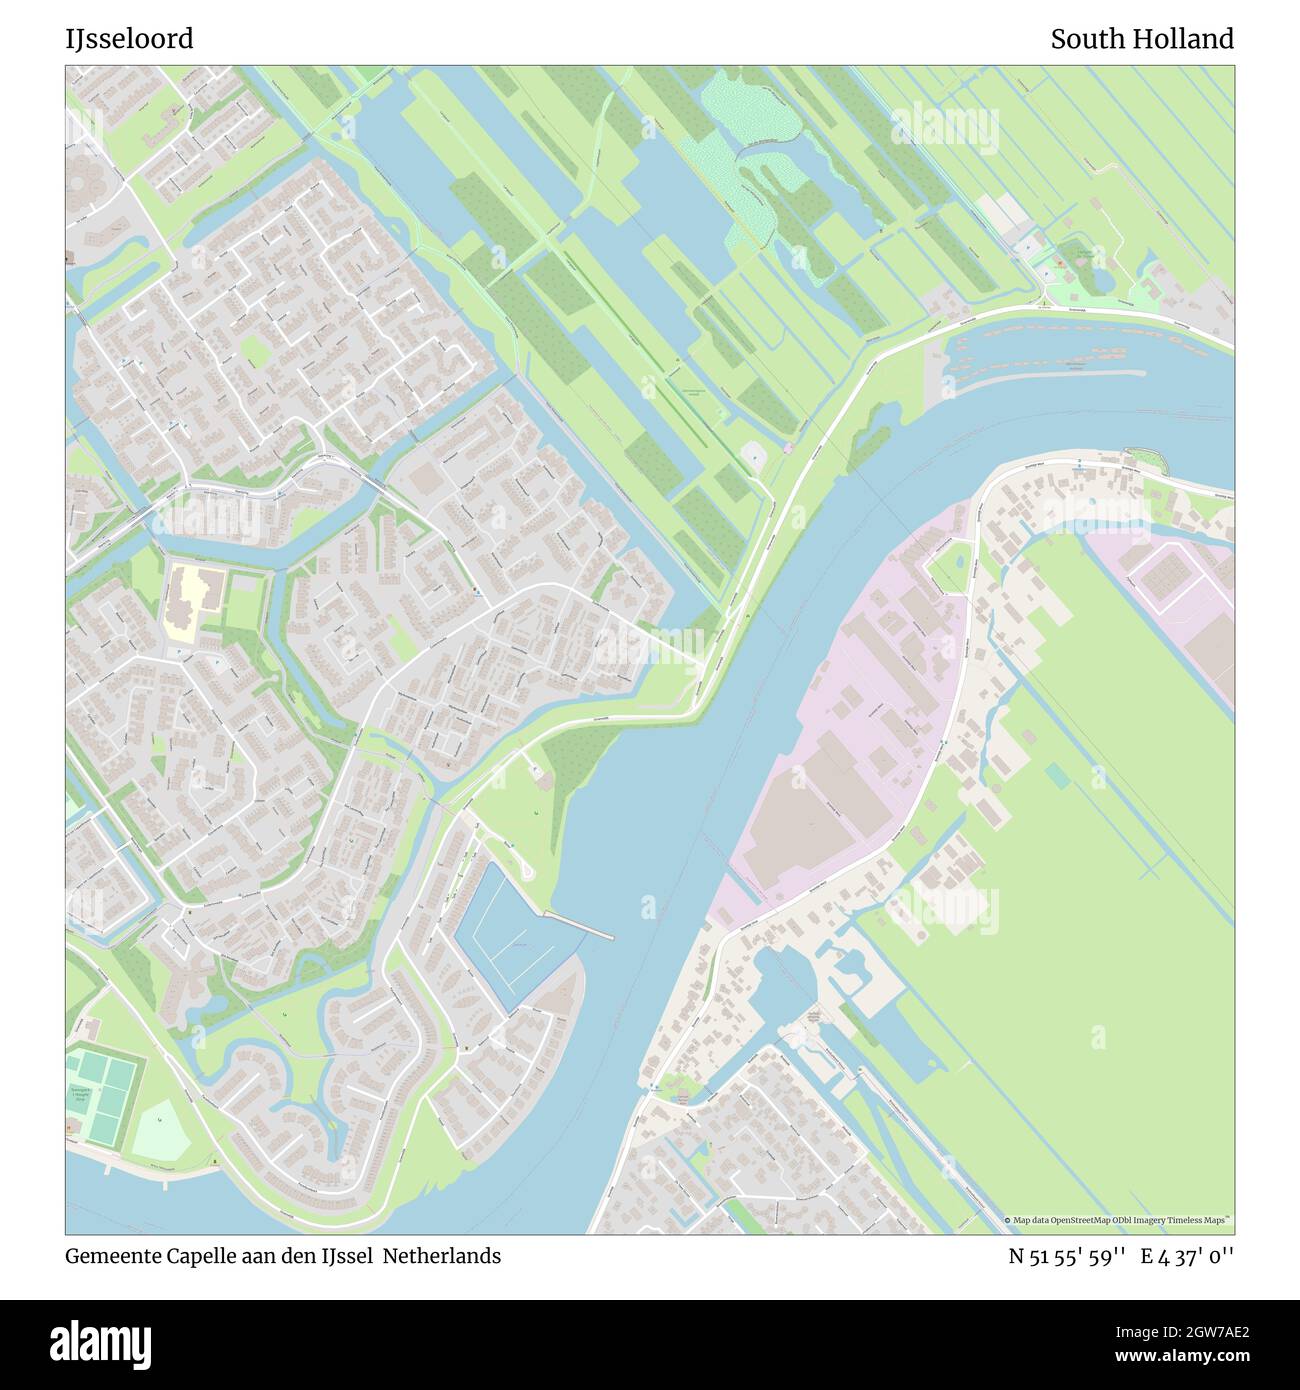 IJsseloord, Gemeente Capelle aan den IJssel, Netherlands, South Holland, N 51 55' 59'', E 4 37' 0'', map, Timeless Map published in 2021. Travelers, explorers and adventurers like Florence Nightingale, David Livingstone, Ernest Shackleton, Lewis and Clark and Sherlock Holmes relied on maps to plan travels to the world's most remote corners, Timeless Maps is mapping most locations on the globe, showing the achievement of great dreams Stock Photo